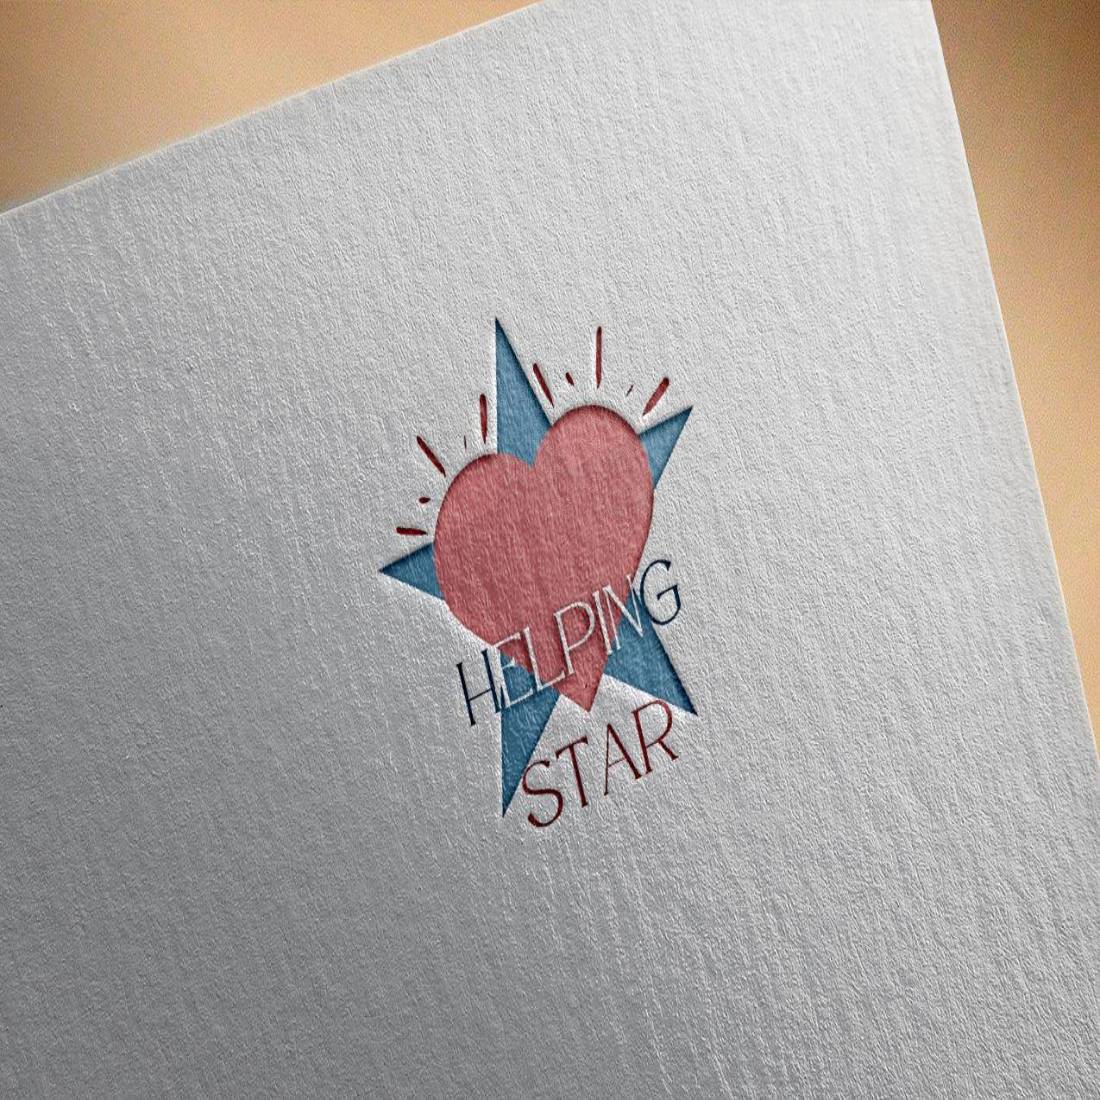 Heart and Star Logo Design cover image.